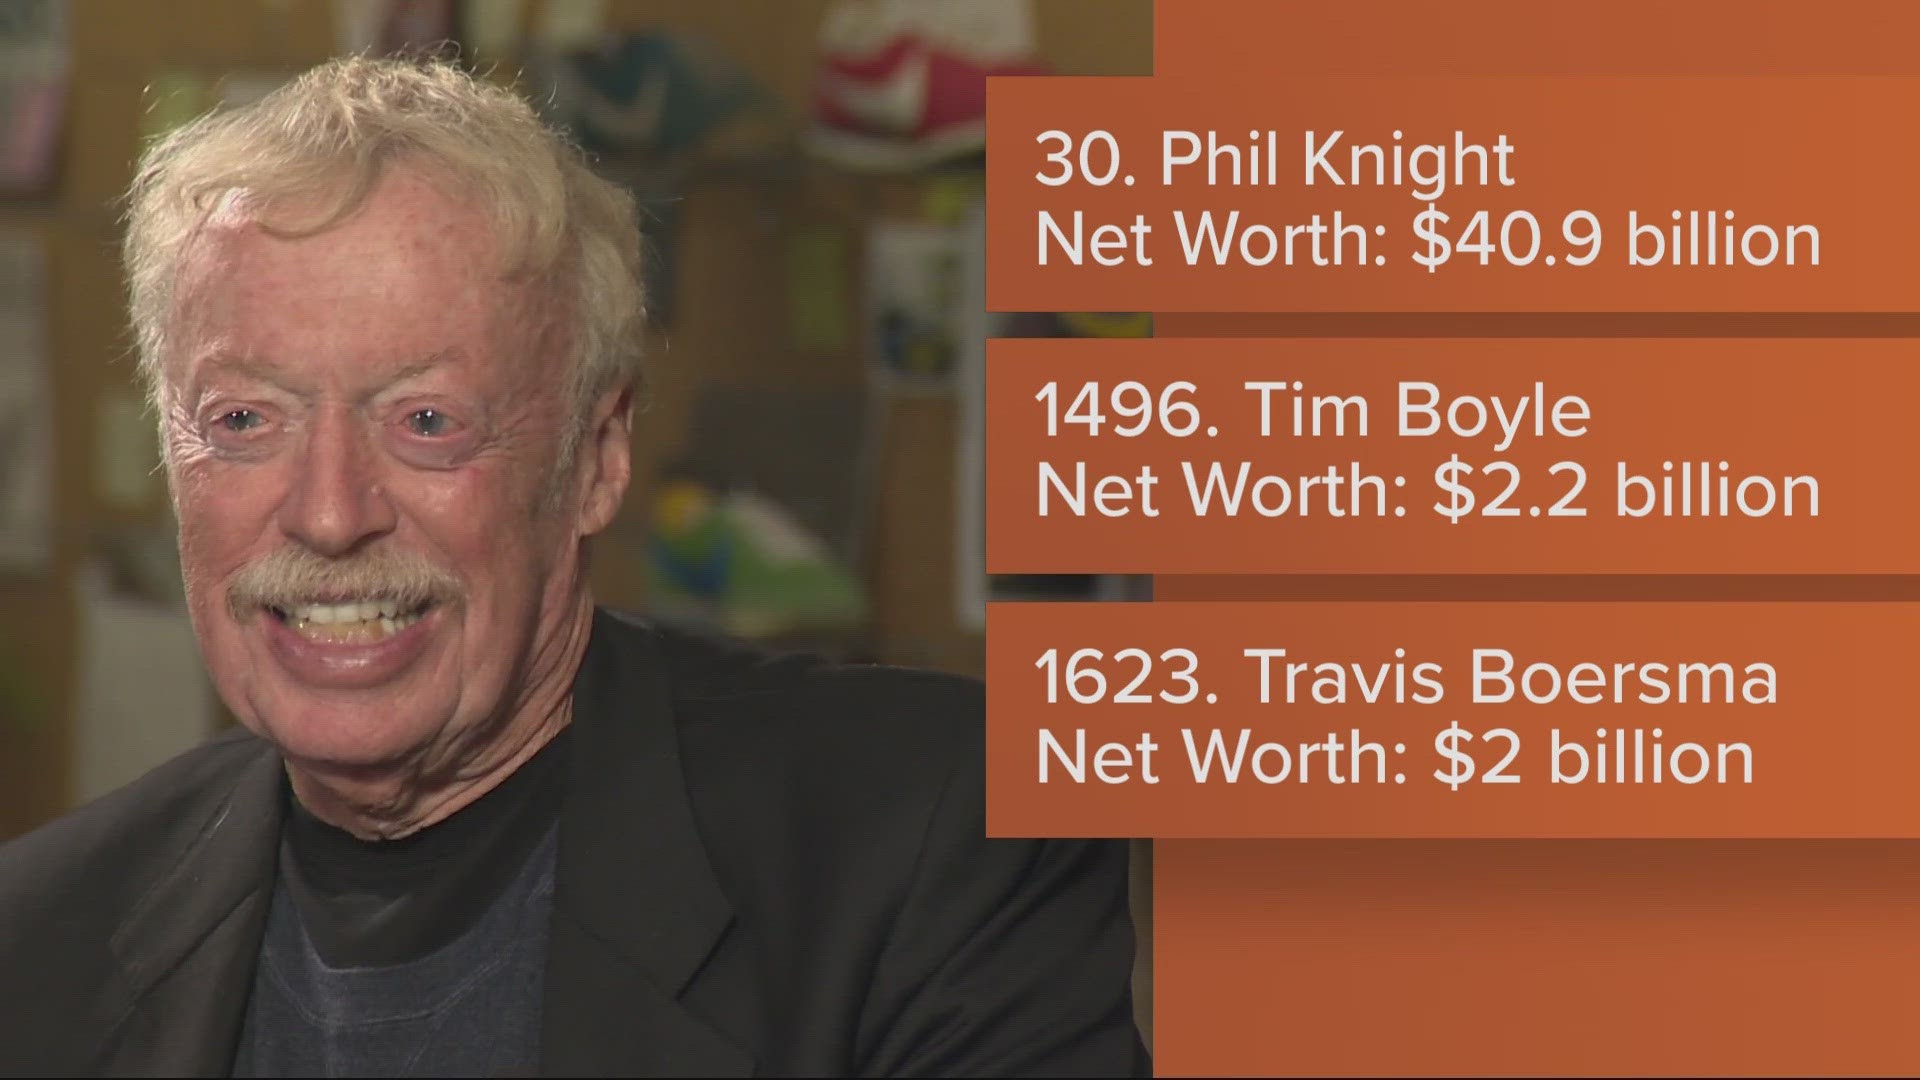 The latest rankings from Forbes' list of the richest people included three Oregonians: Phil Knight, Tim Boyle and Travis Boersma.